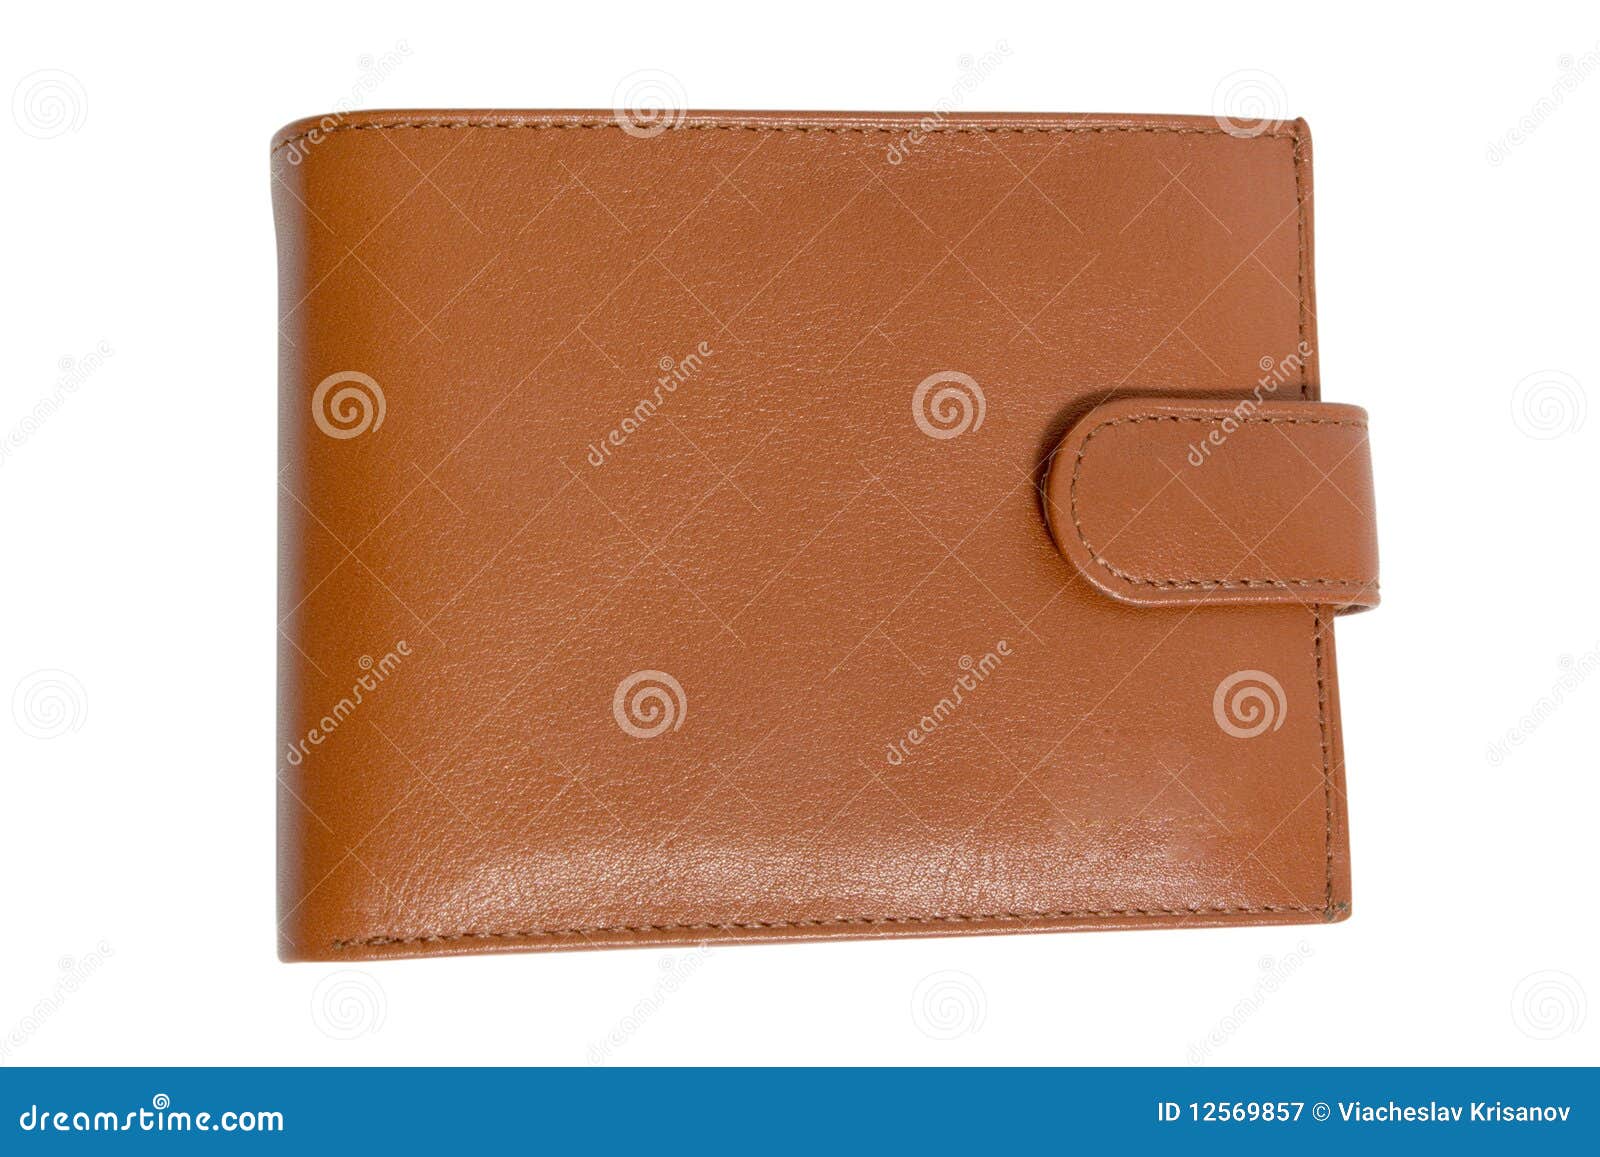 Brown leather wallet stock image. Image of banking, organizer - 12569857